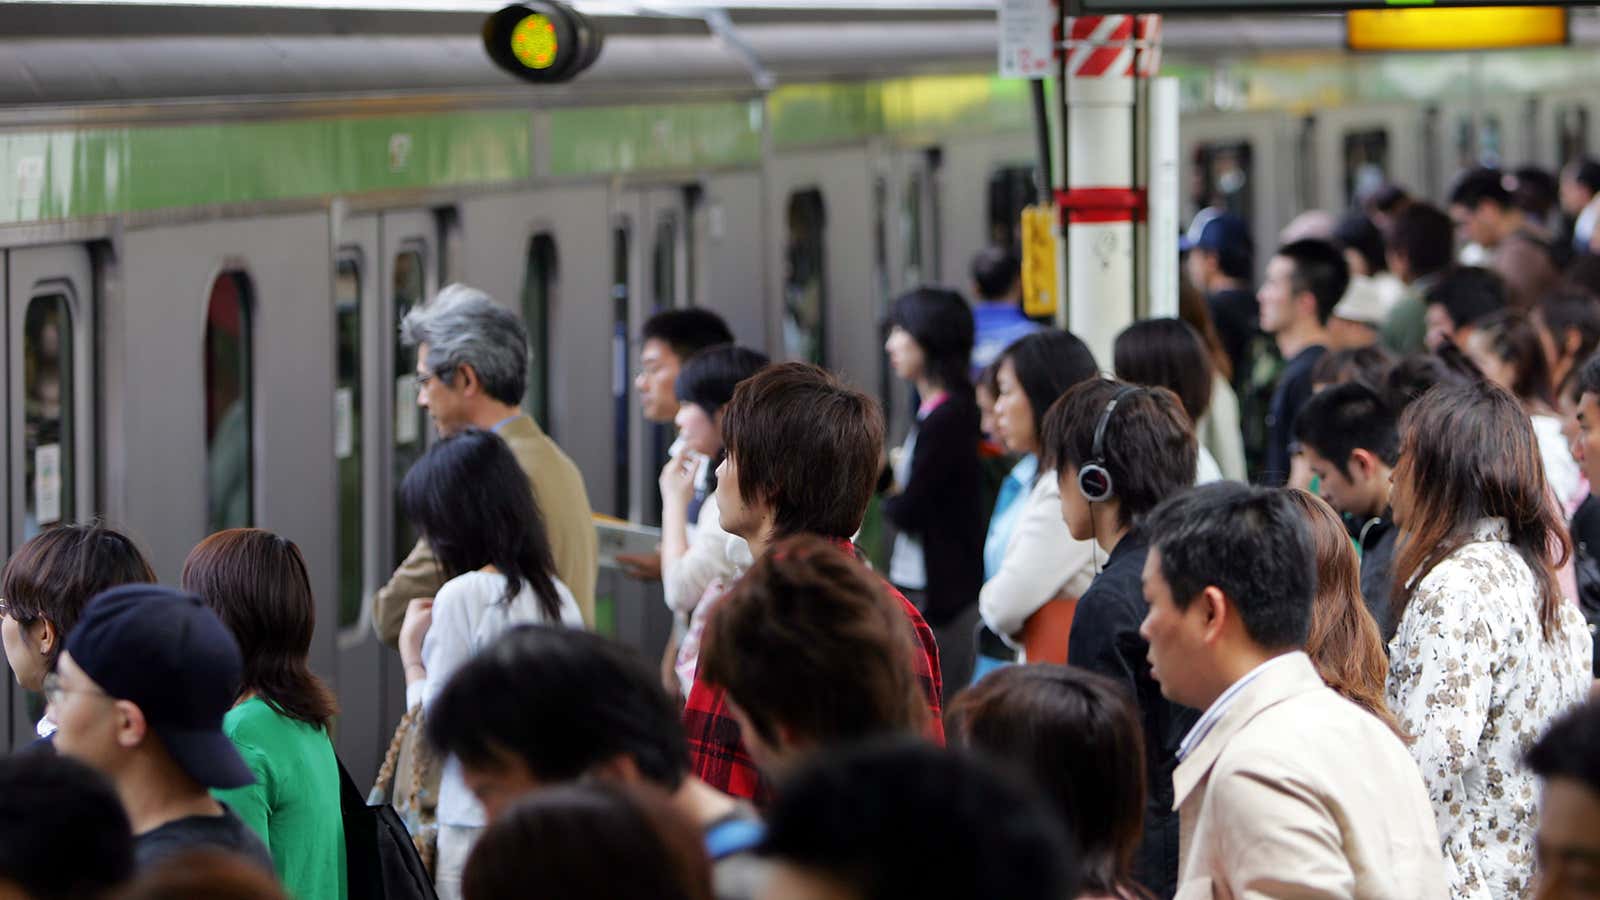 A crowd of people step forward as a train arrives at a station in Tokyo.